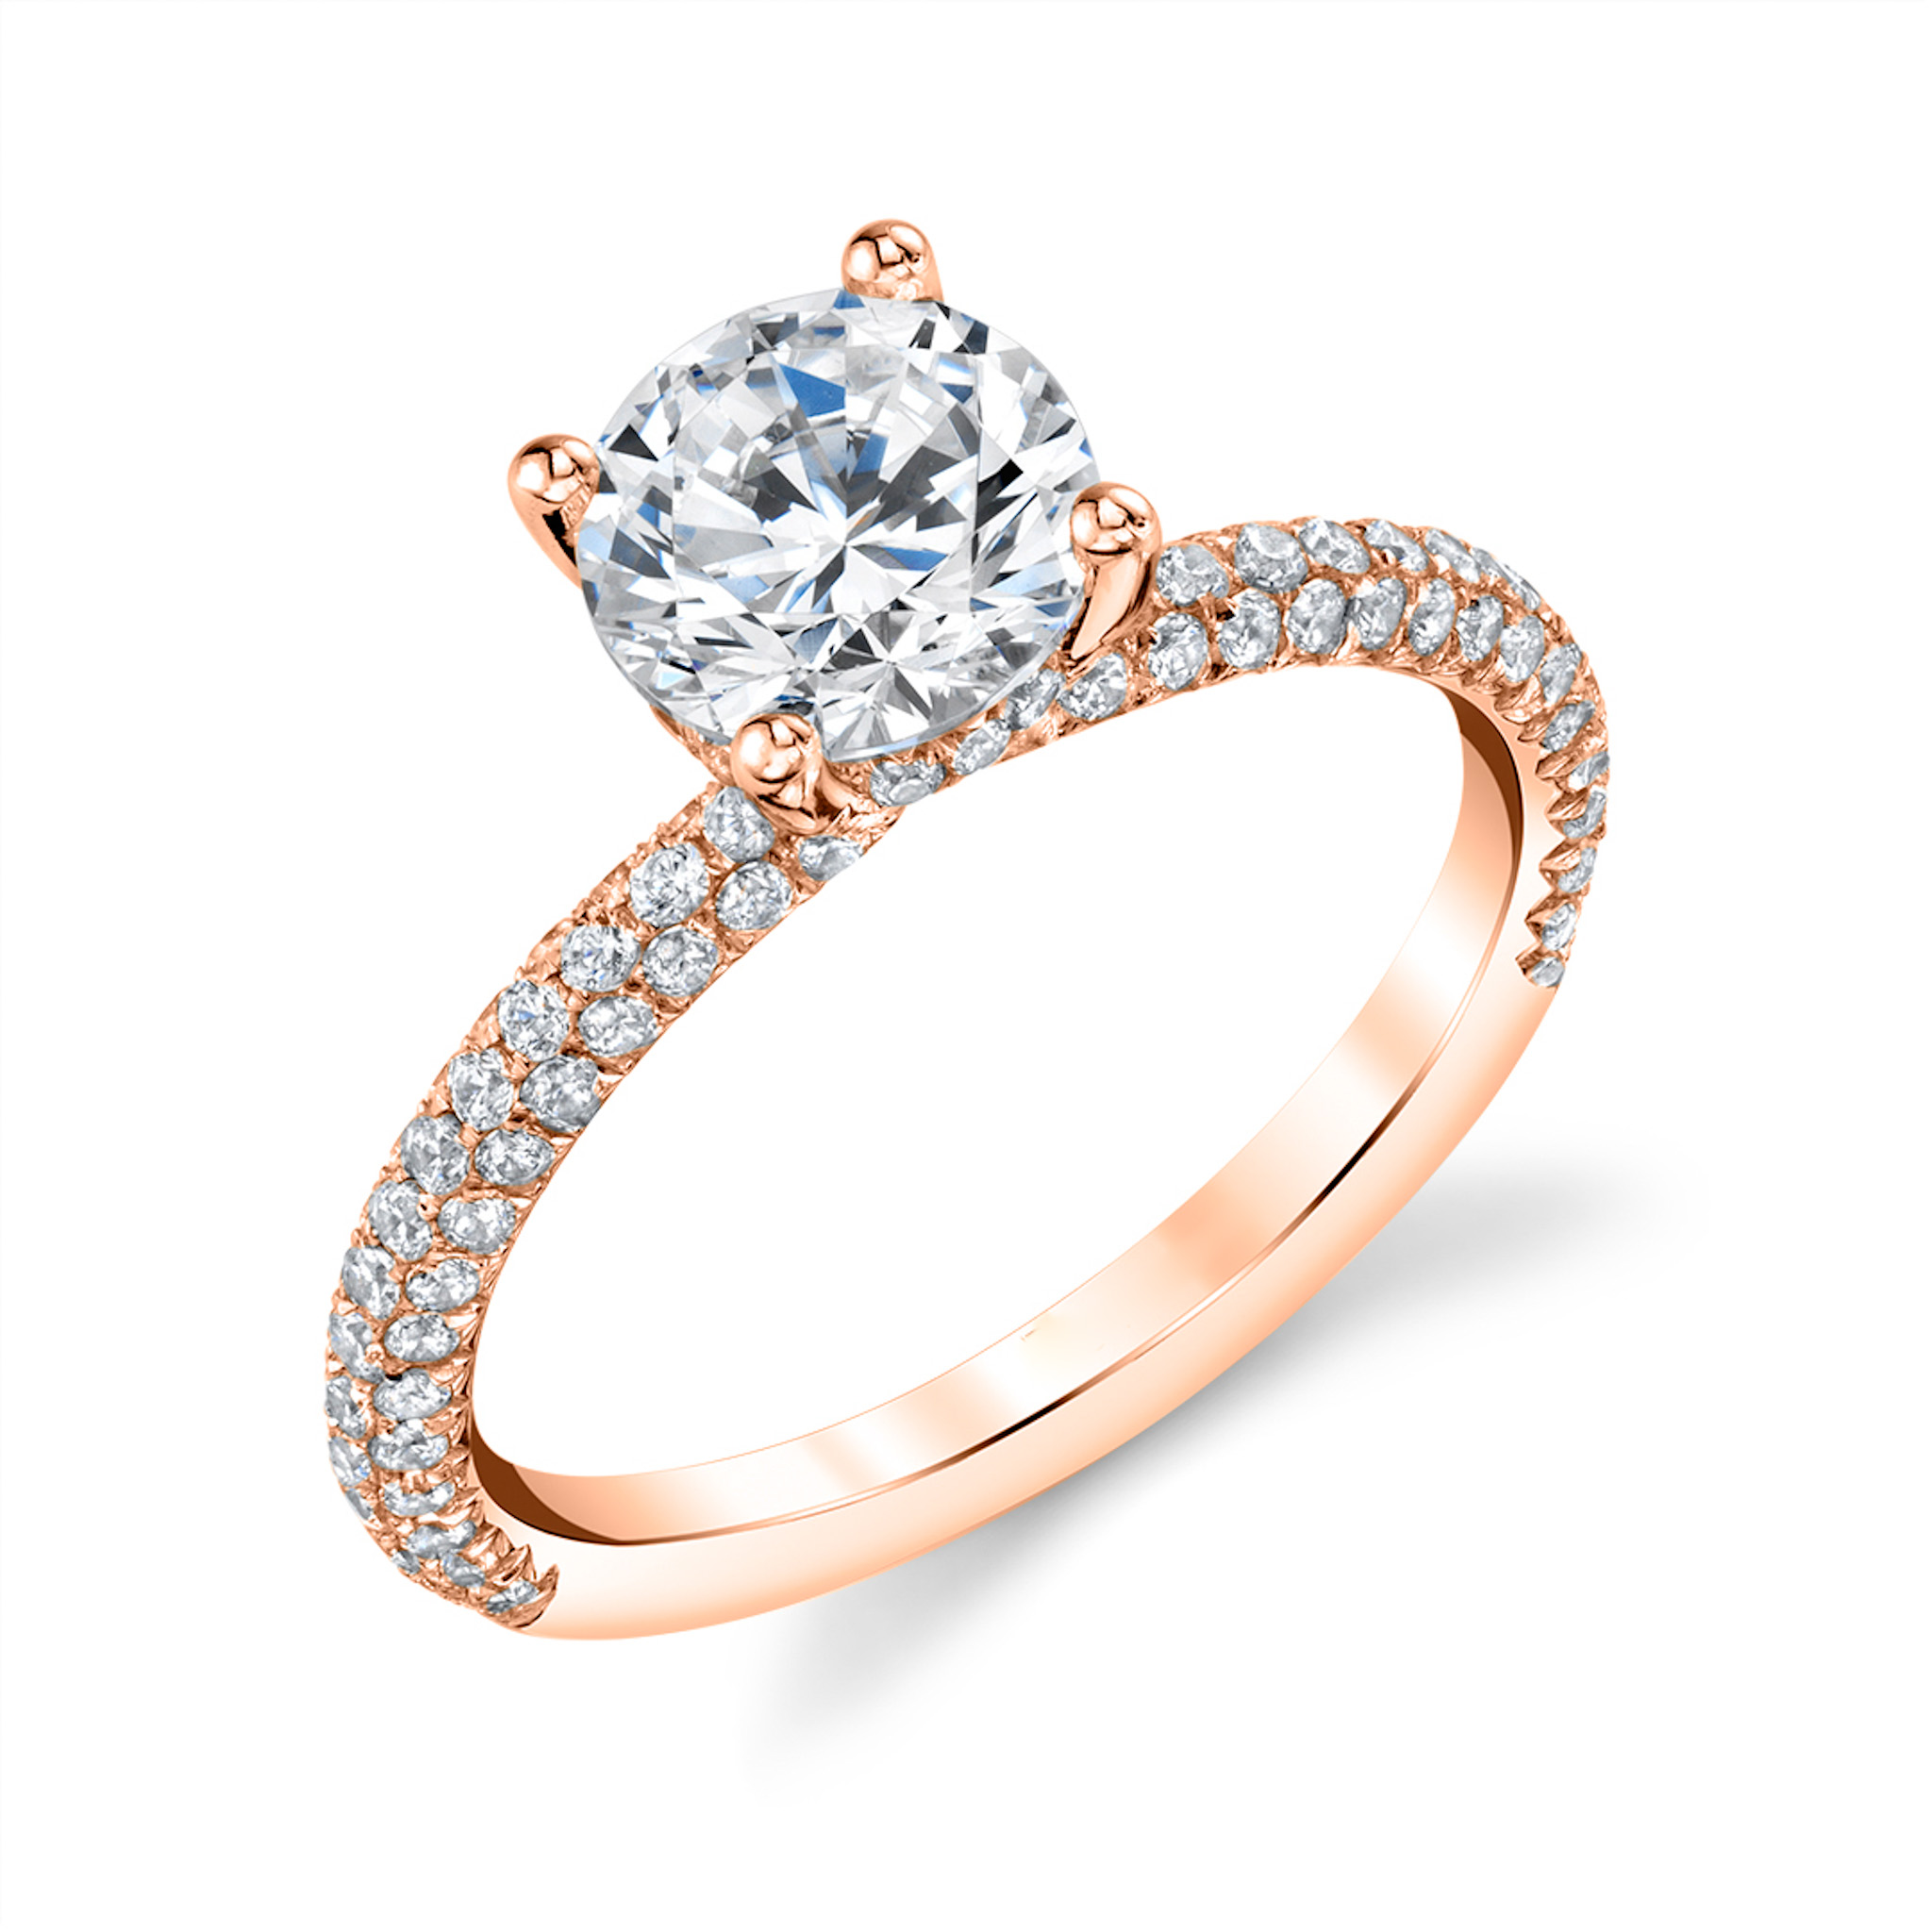 Explore Engagement Ring Collection